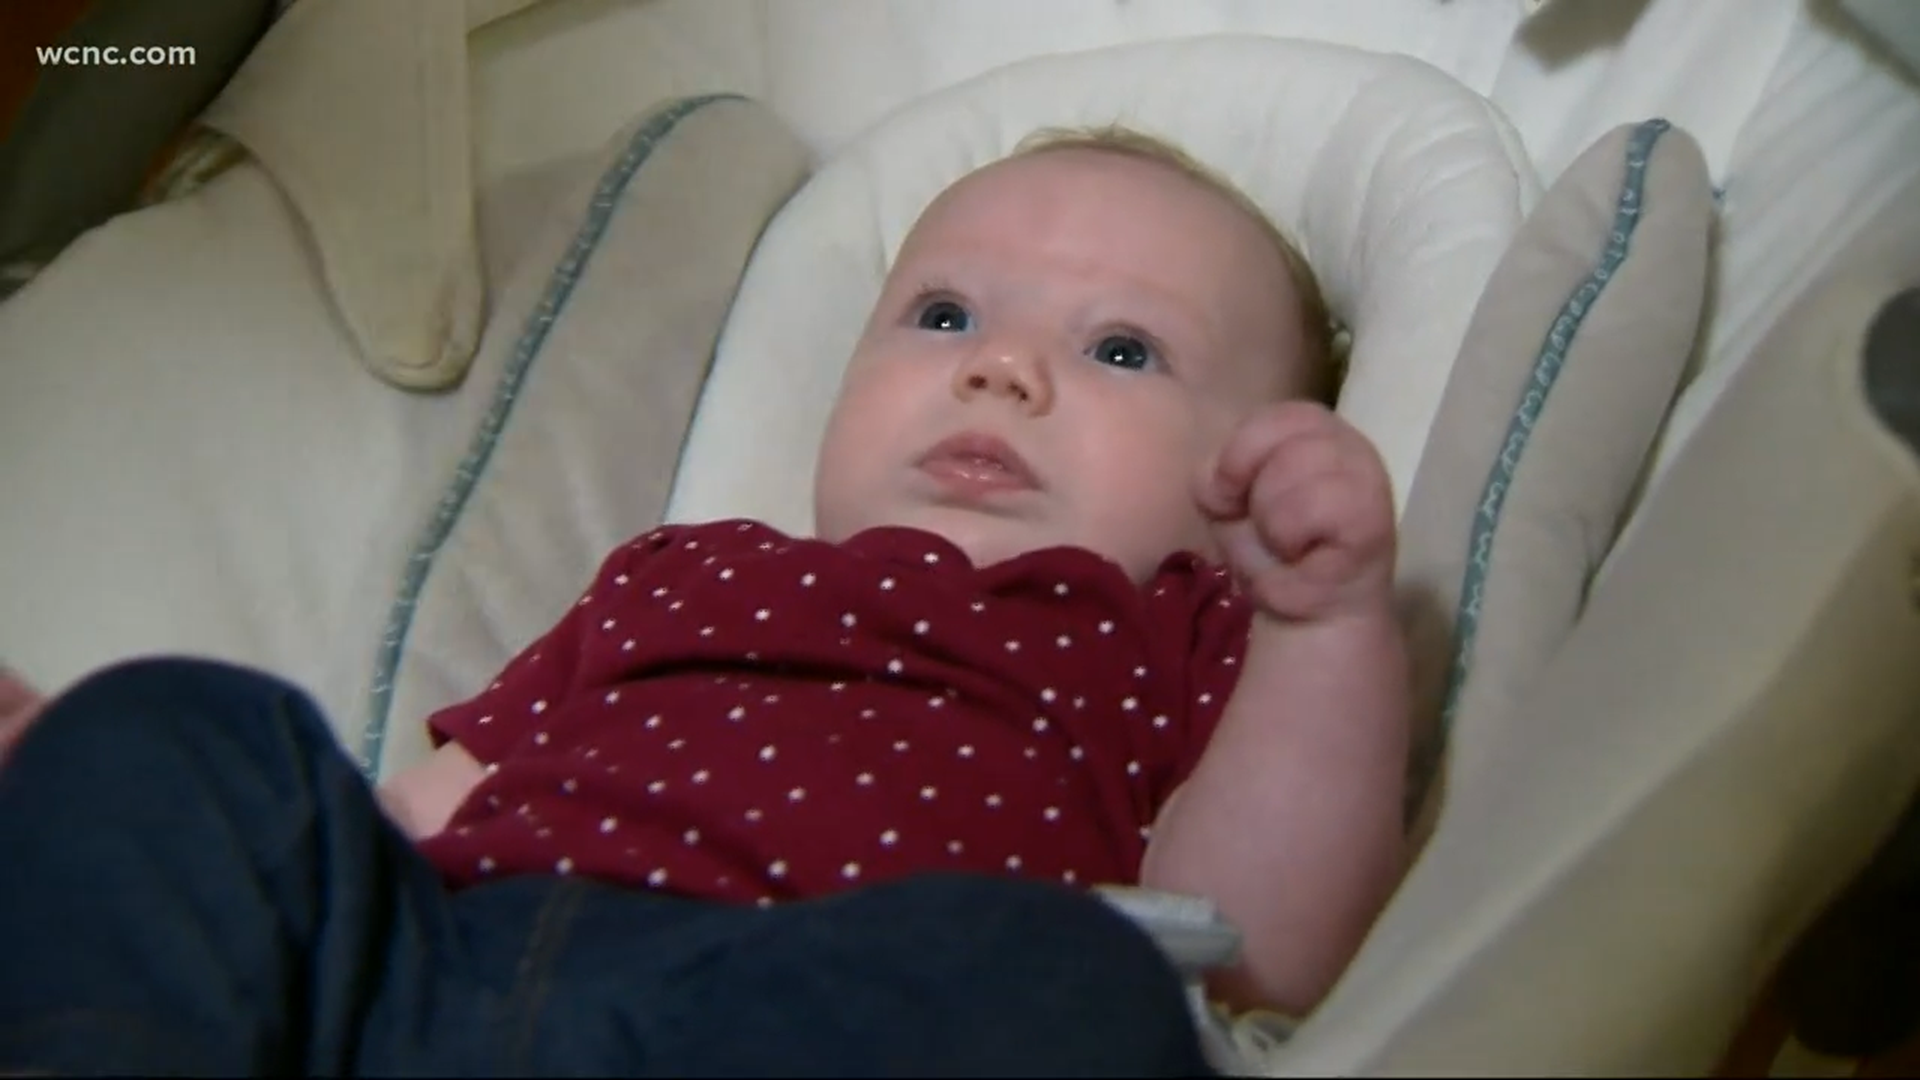 A 4-month-old Gaston County girl suffered an injury in recent weeks. Her parents believe their babysitter is to blame. They filmed her with a hidden camera.